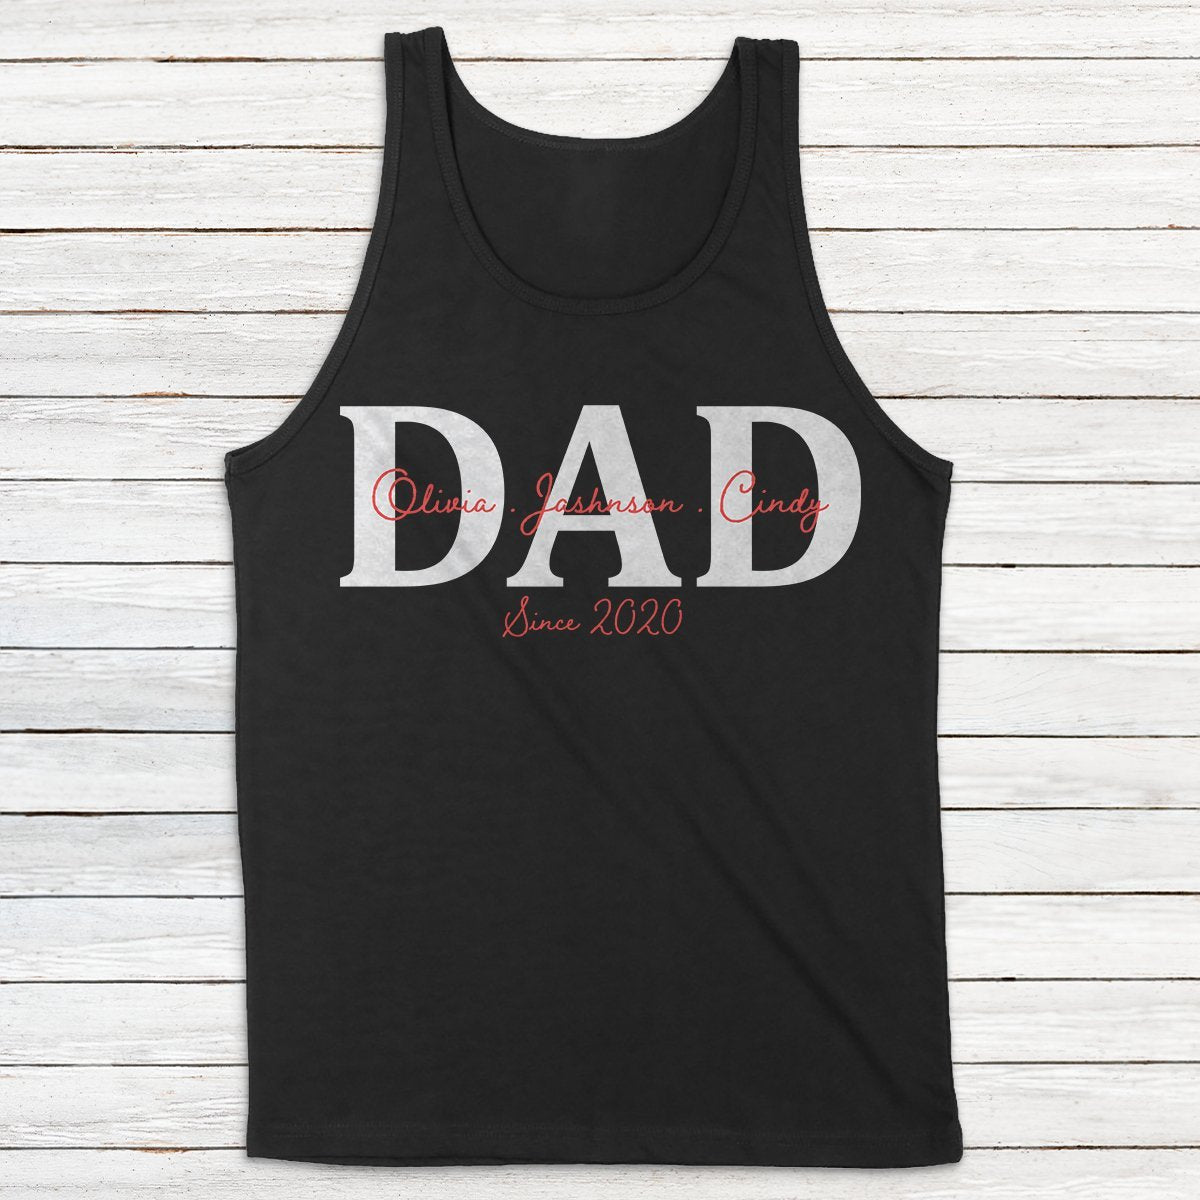 Dad, Custom Text Personalized Shirt